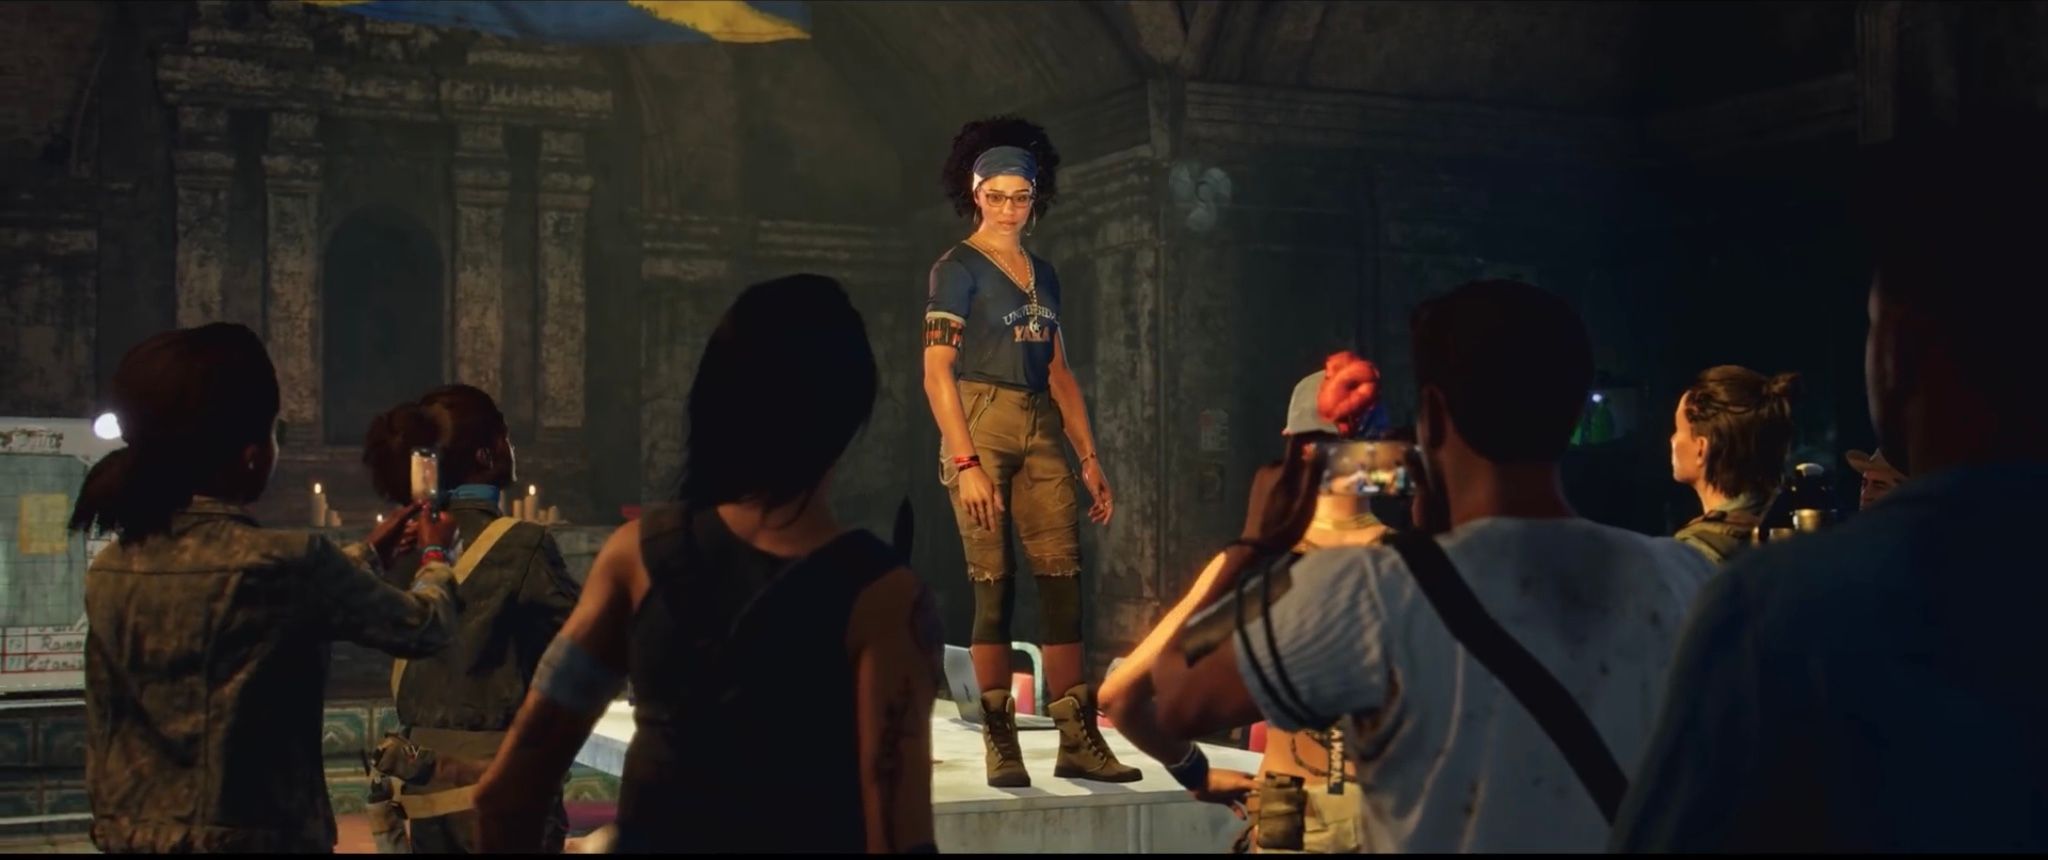 Far Cry 6 Yelena Morales Gives A Speech To La Moral Soldiers